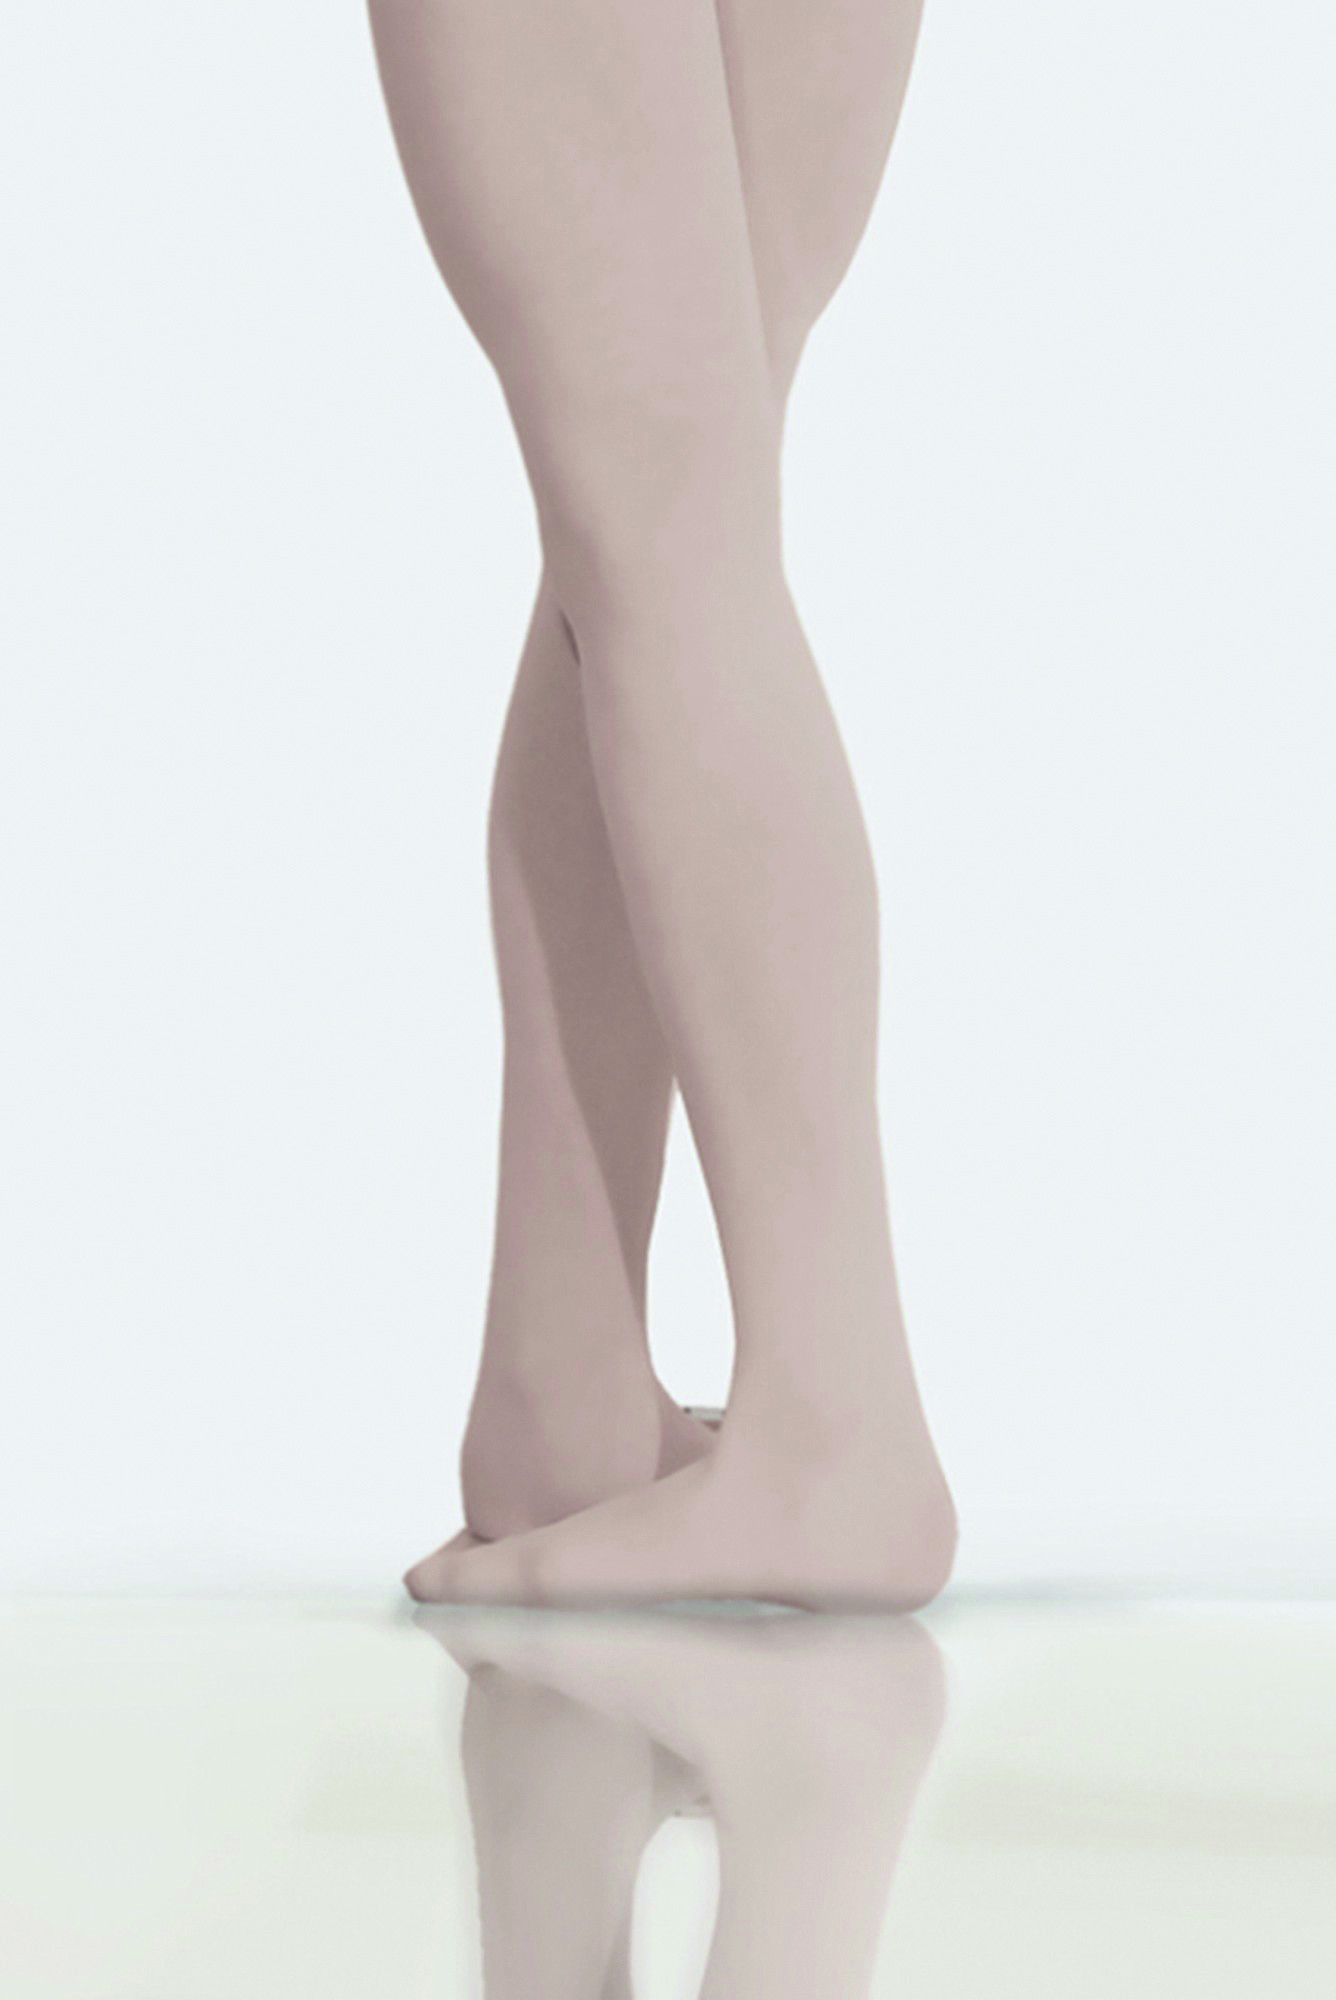 https://wearmoi.com/31228-thickbox_default/premiere-footed-tights-light-pink.jpg